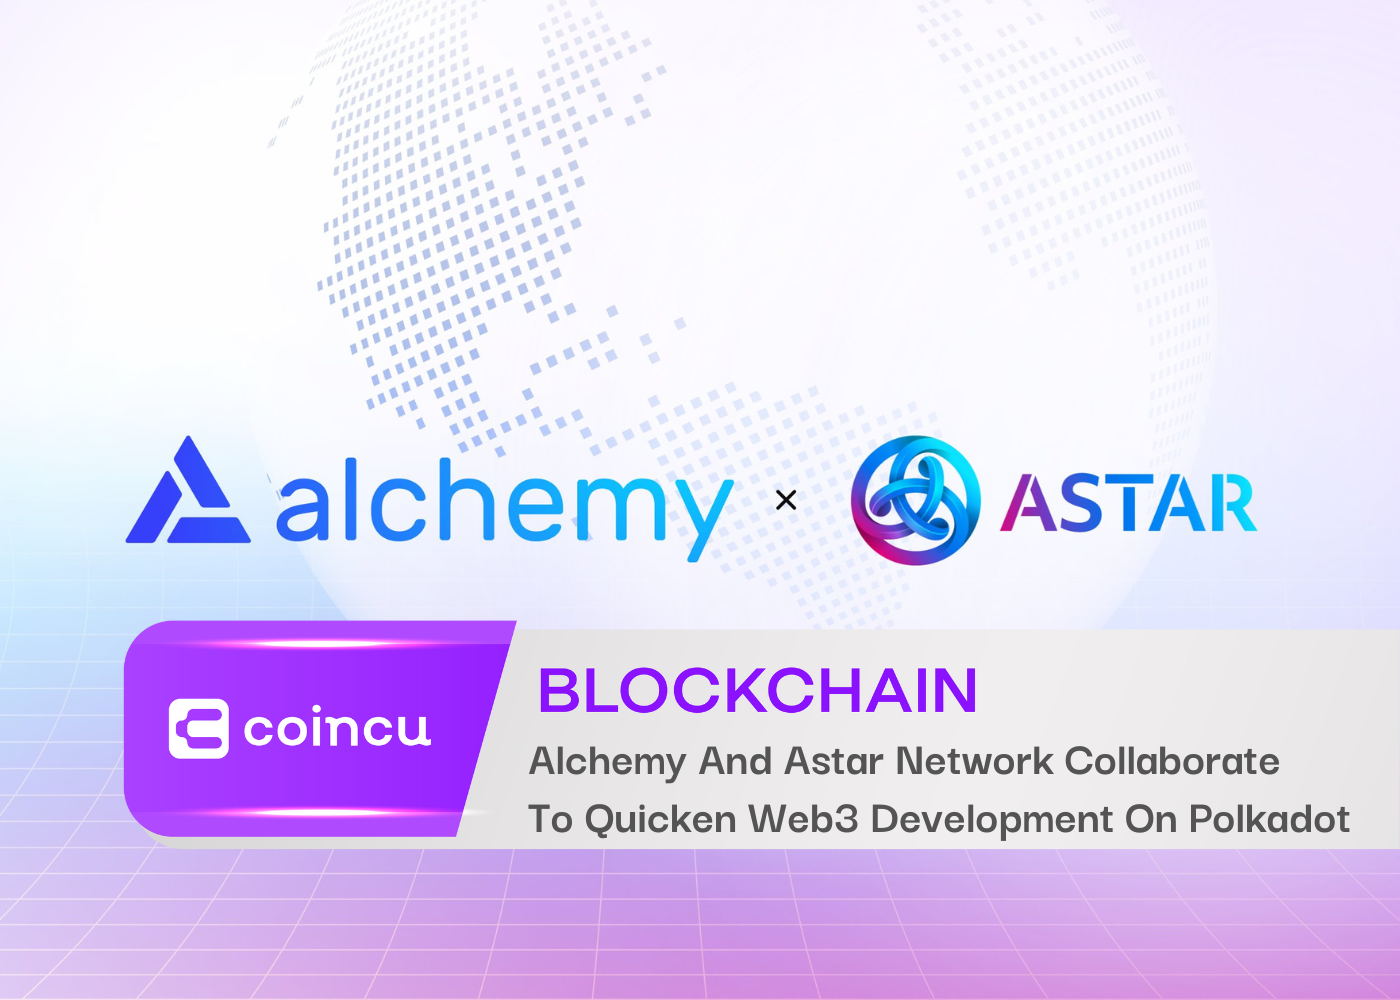 Alchemy And Astar Network Collaborate